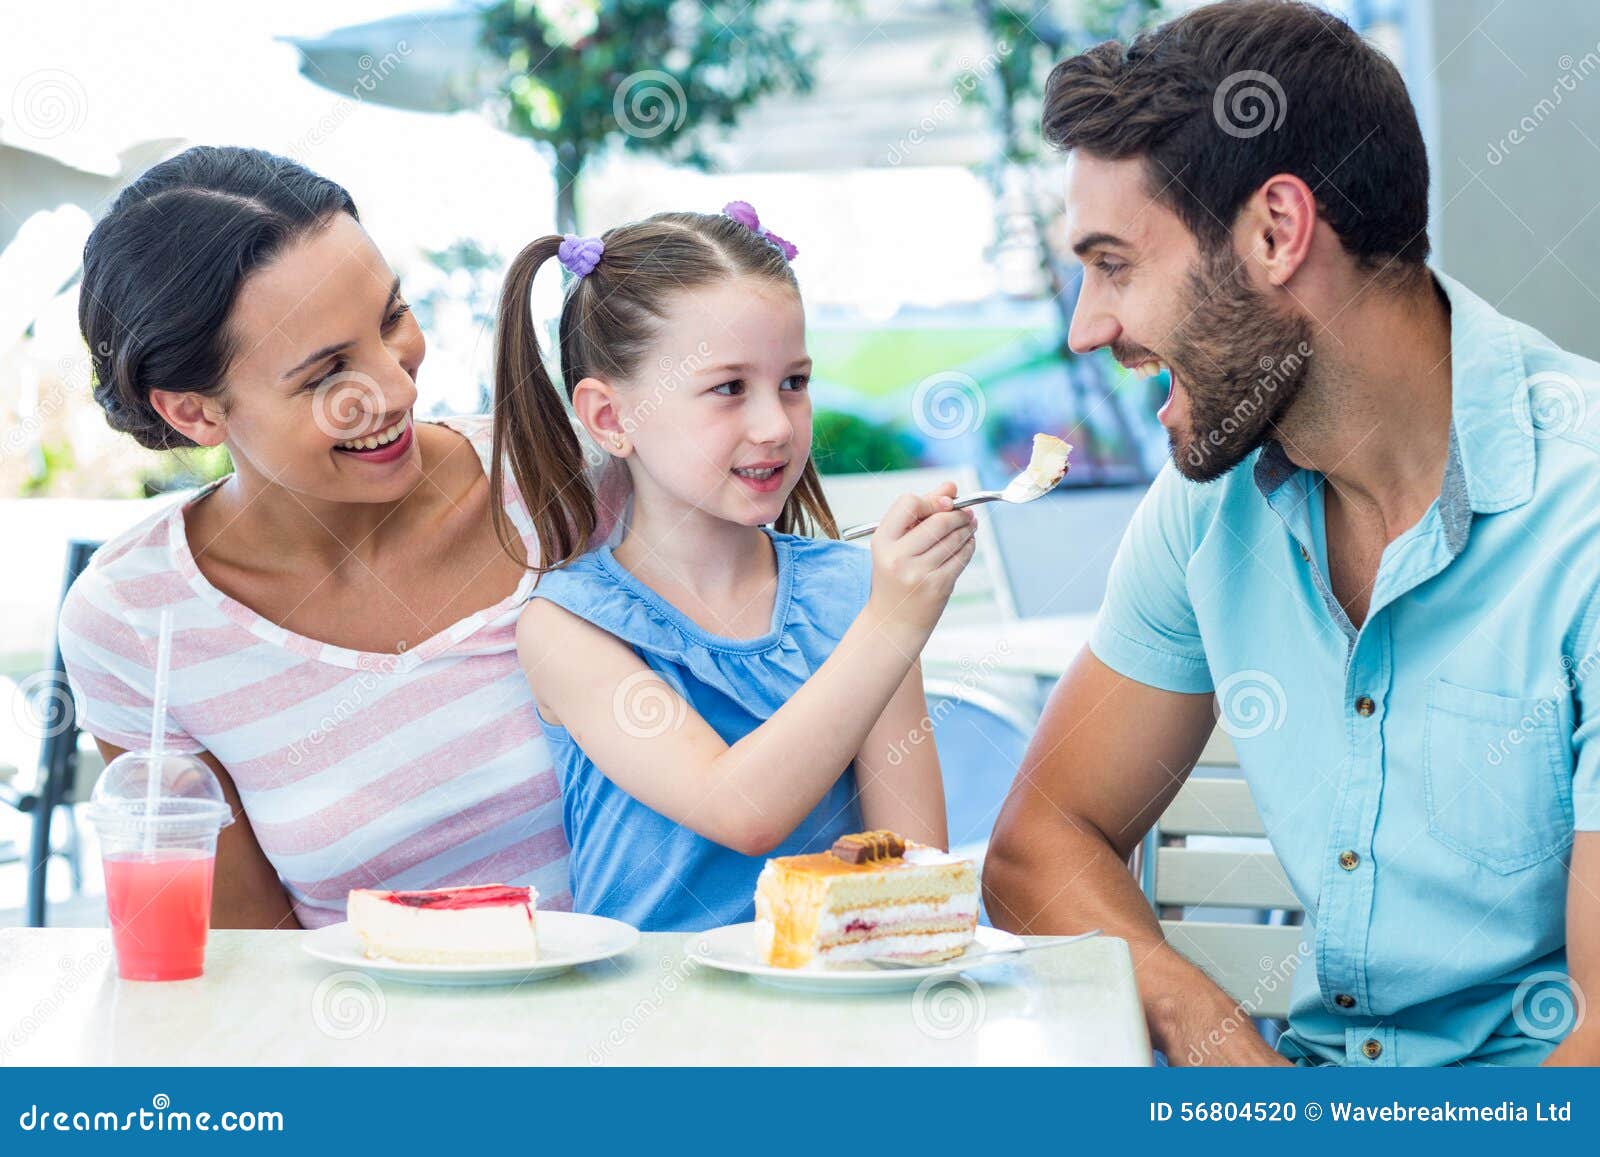 A Family Eating at the Restaurant Stock Photo - Image of family